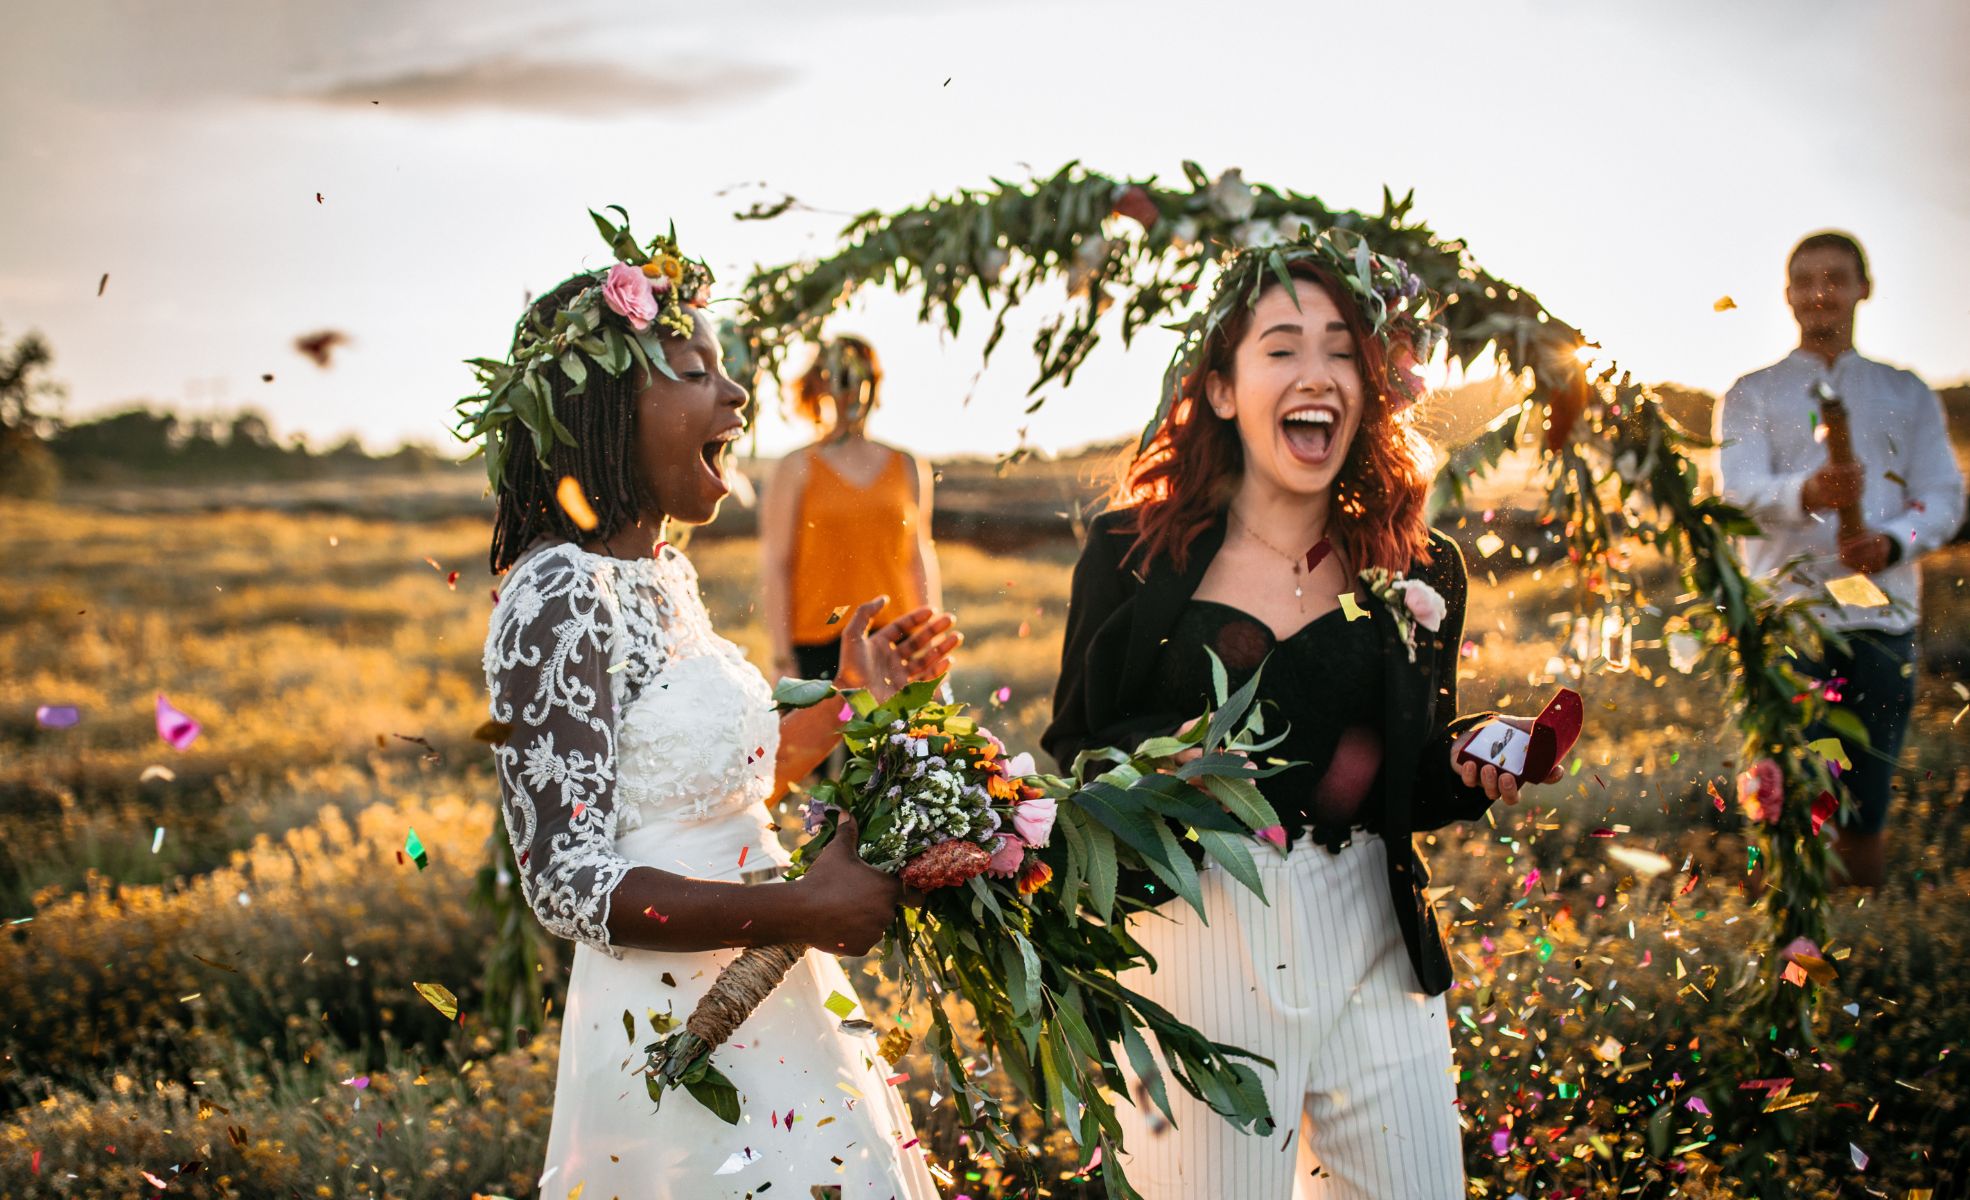 A Boho-Themed Party In Field